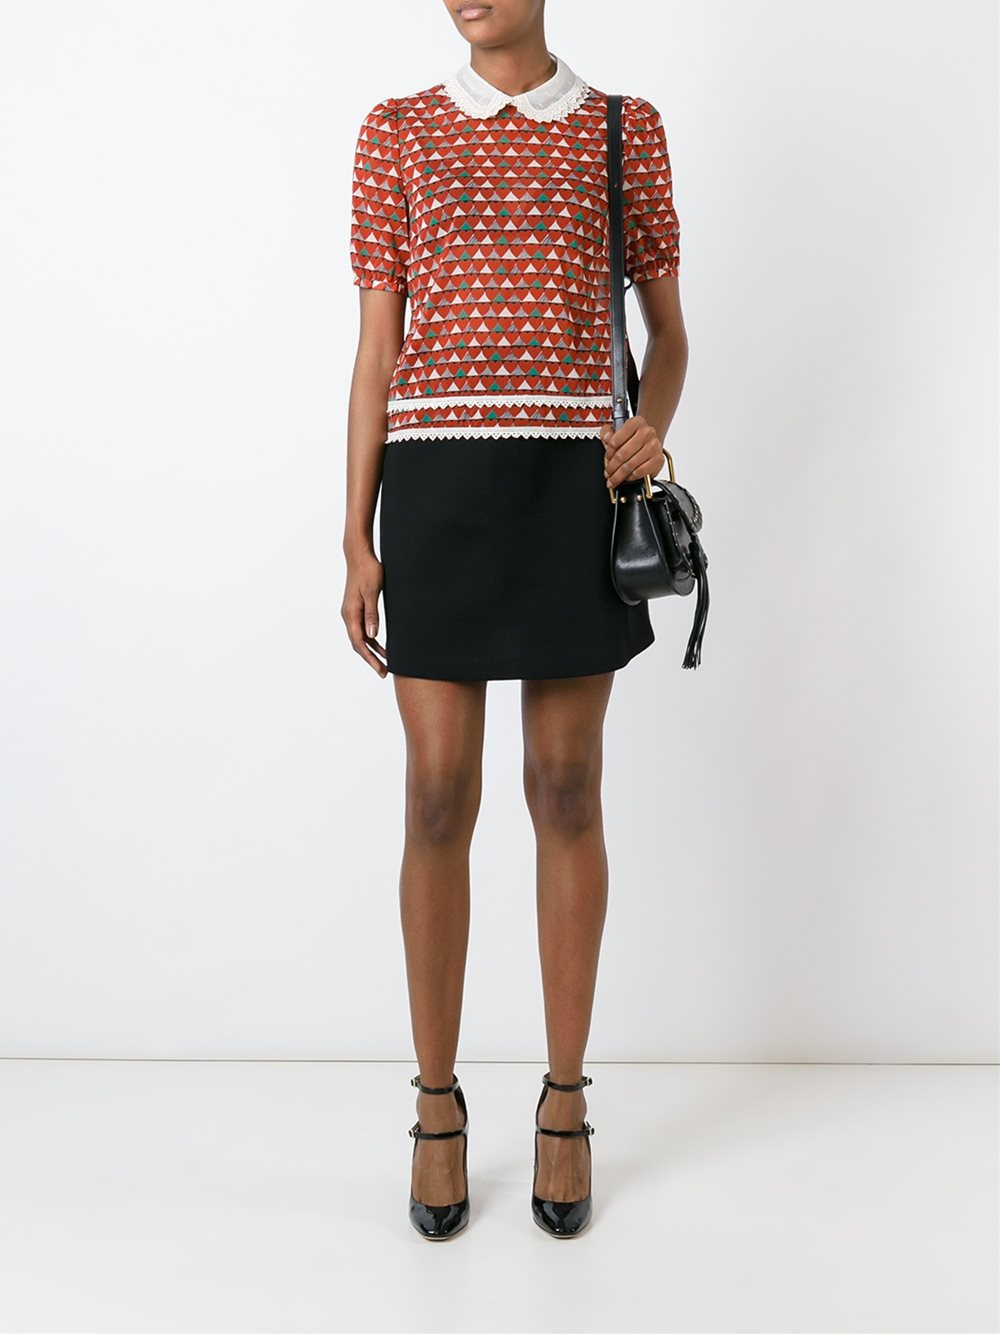 RED Valentino Heart Print Blouse in Black - Lyst